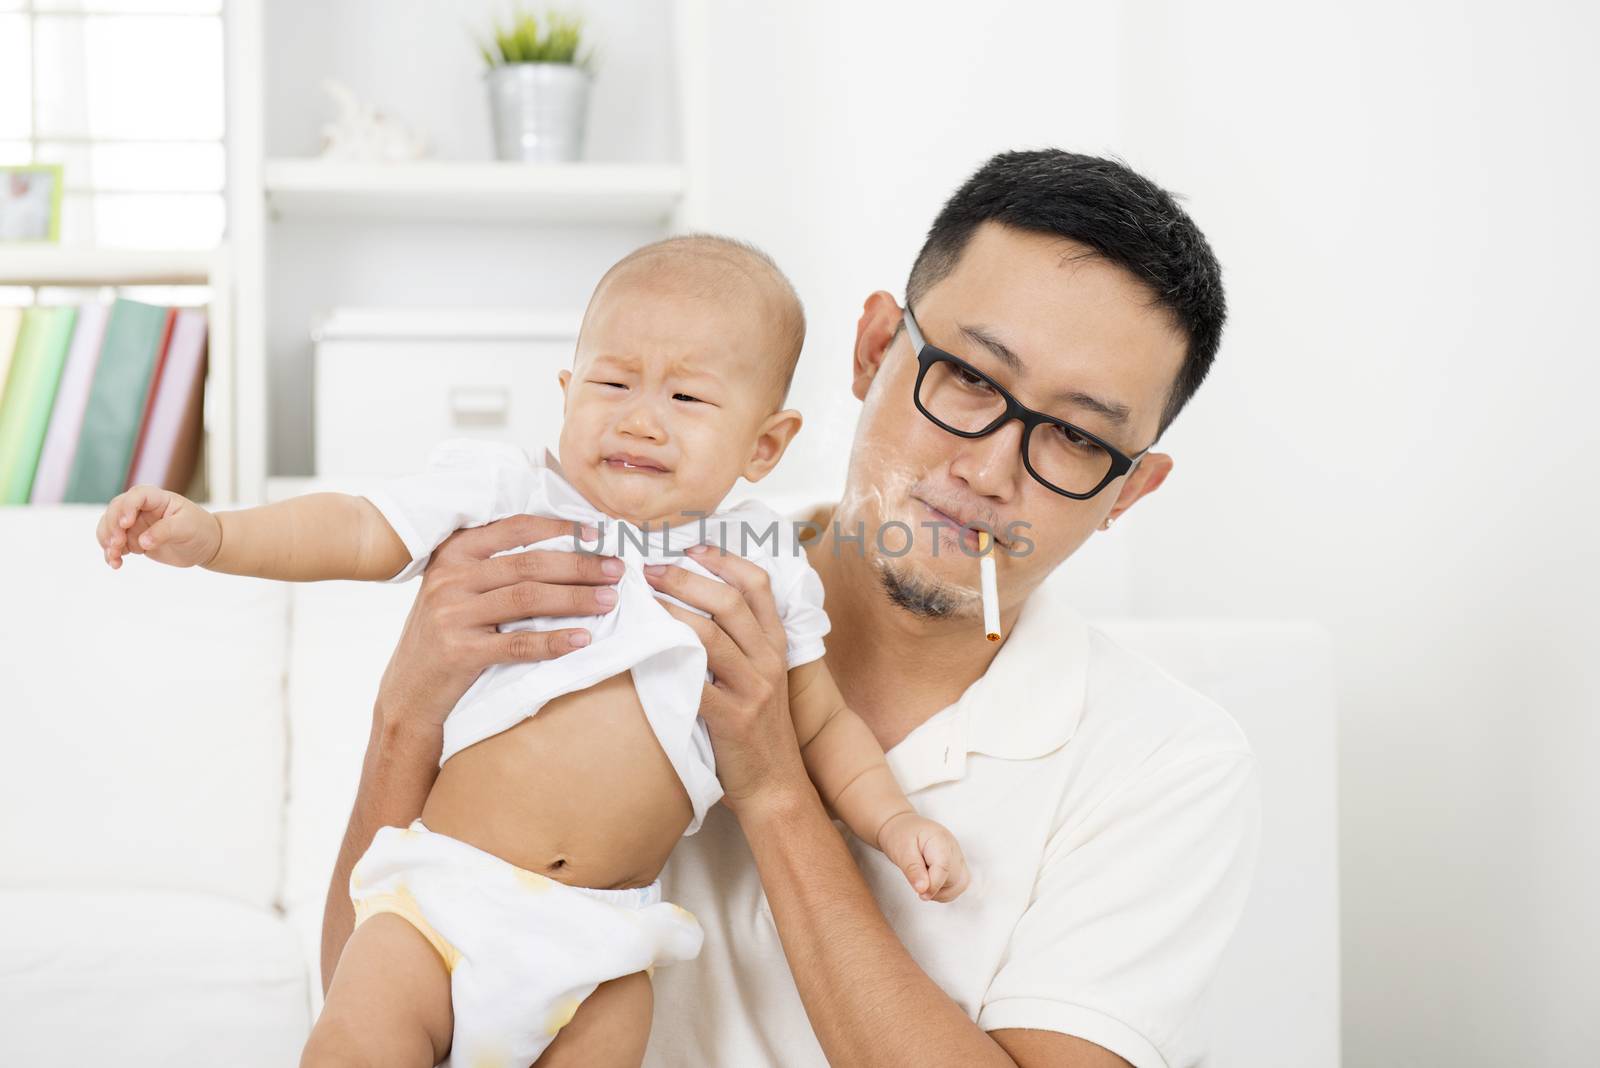 Asian family at home. Bad father smoking while holding baby together. Cigarette with lit and smoke. Unhealthy lifestyle or stop smoking concept photo.